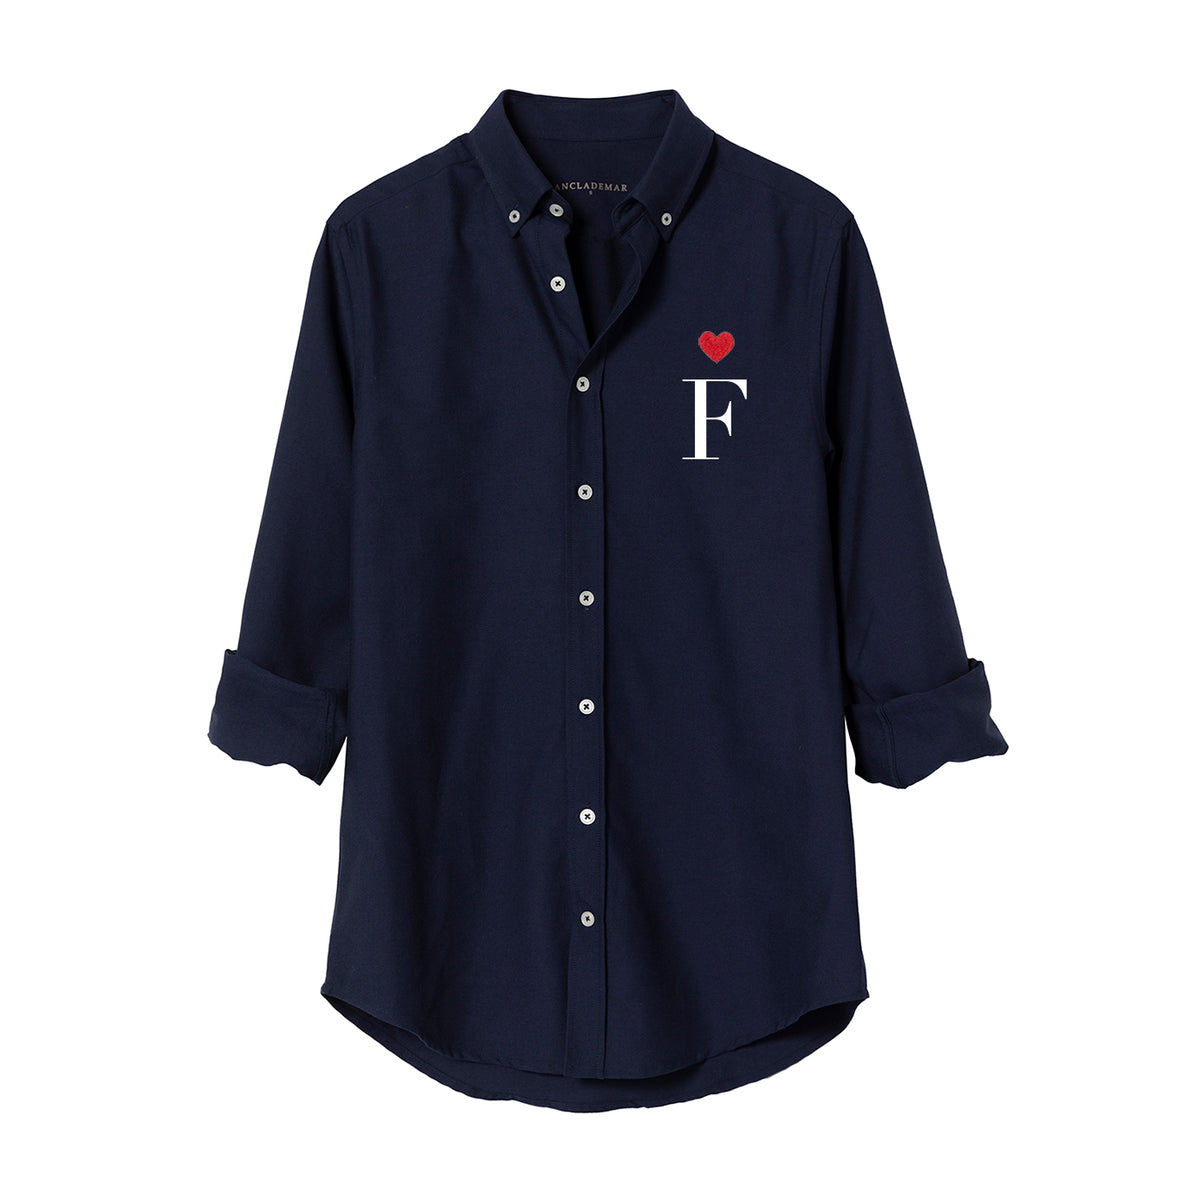 Heart Personalized Navy Oxford Shirt